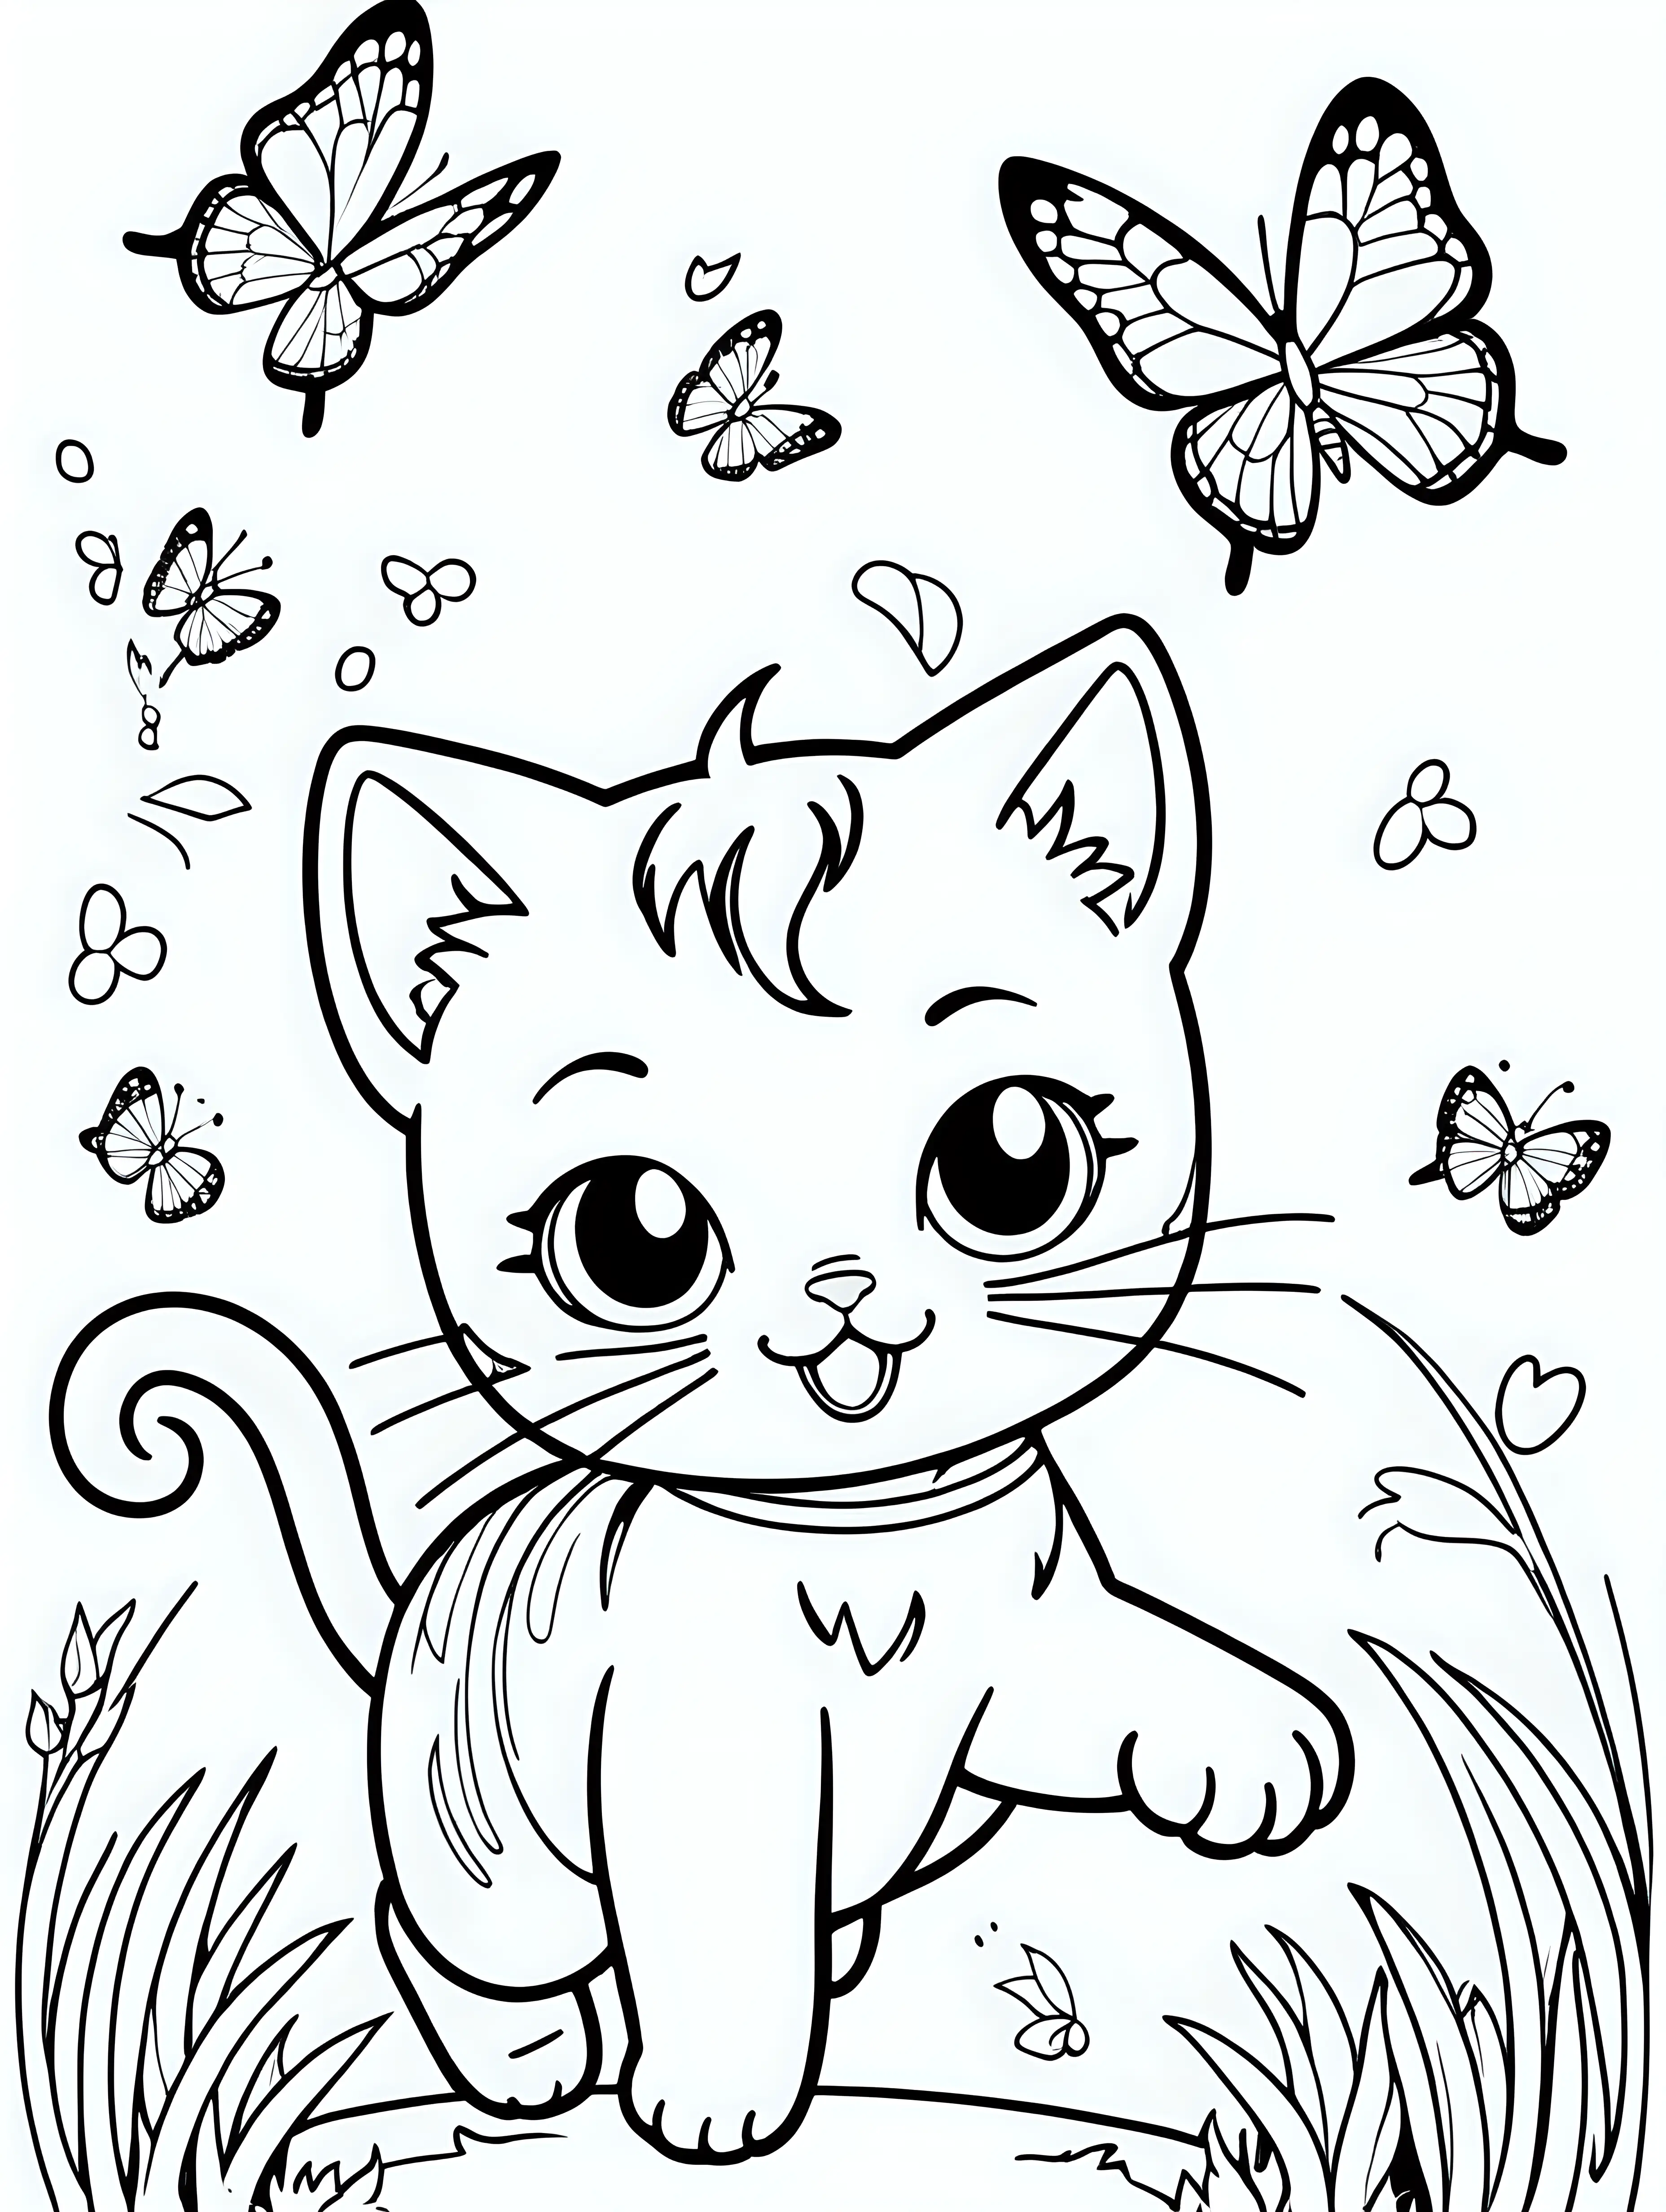 Adorable Kawaii Cat Chasing Butterfly Coloring Page for Kids